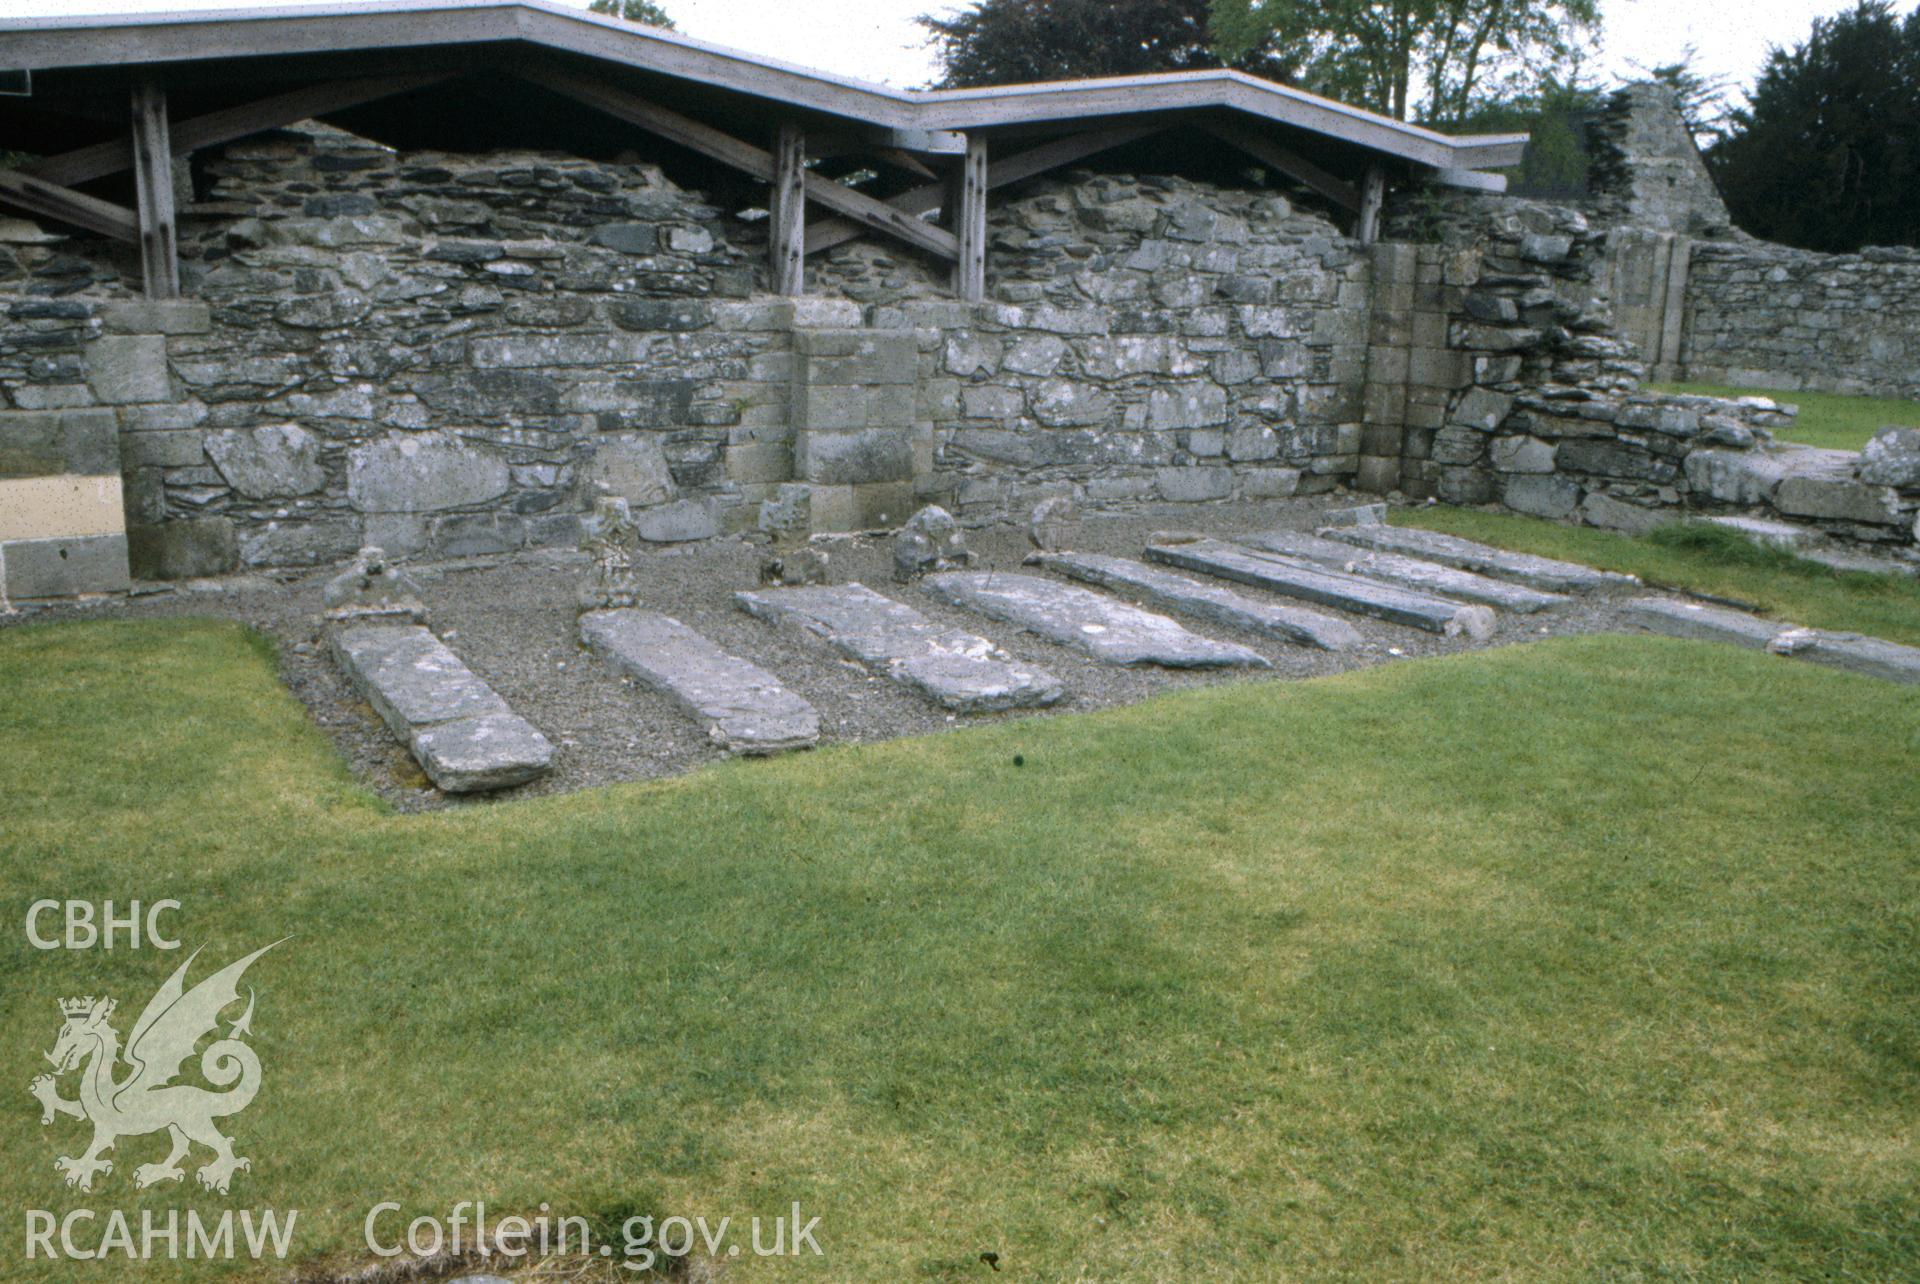 Colour slide showing memorial stones in the churchyard at St Mary's Church.